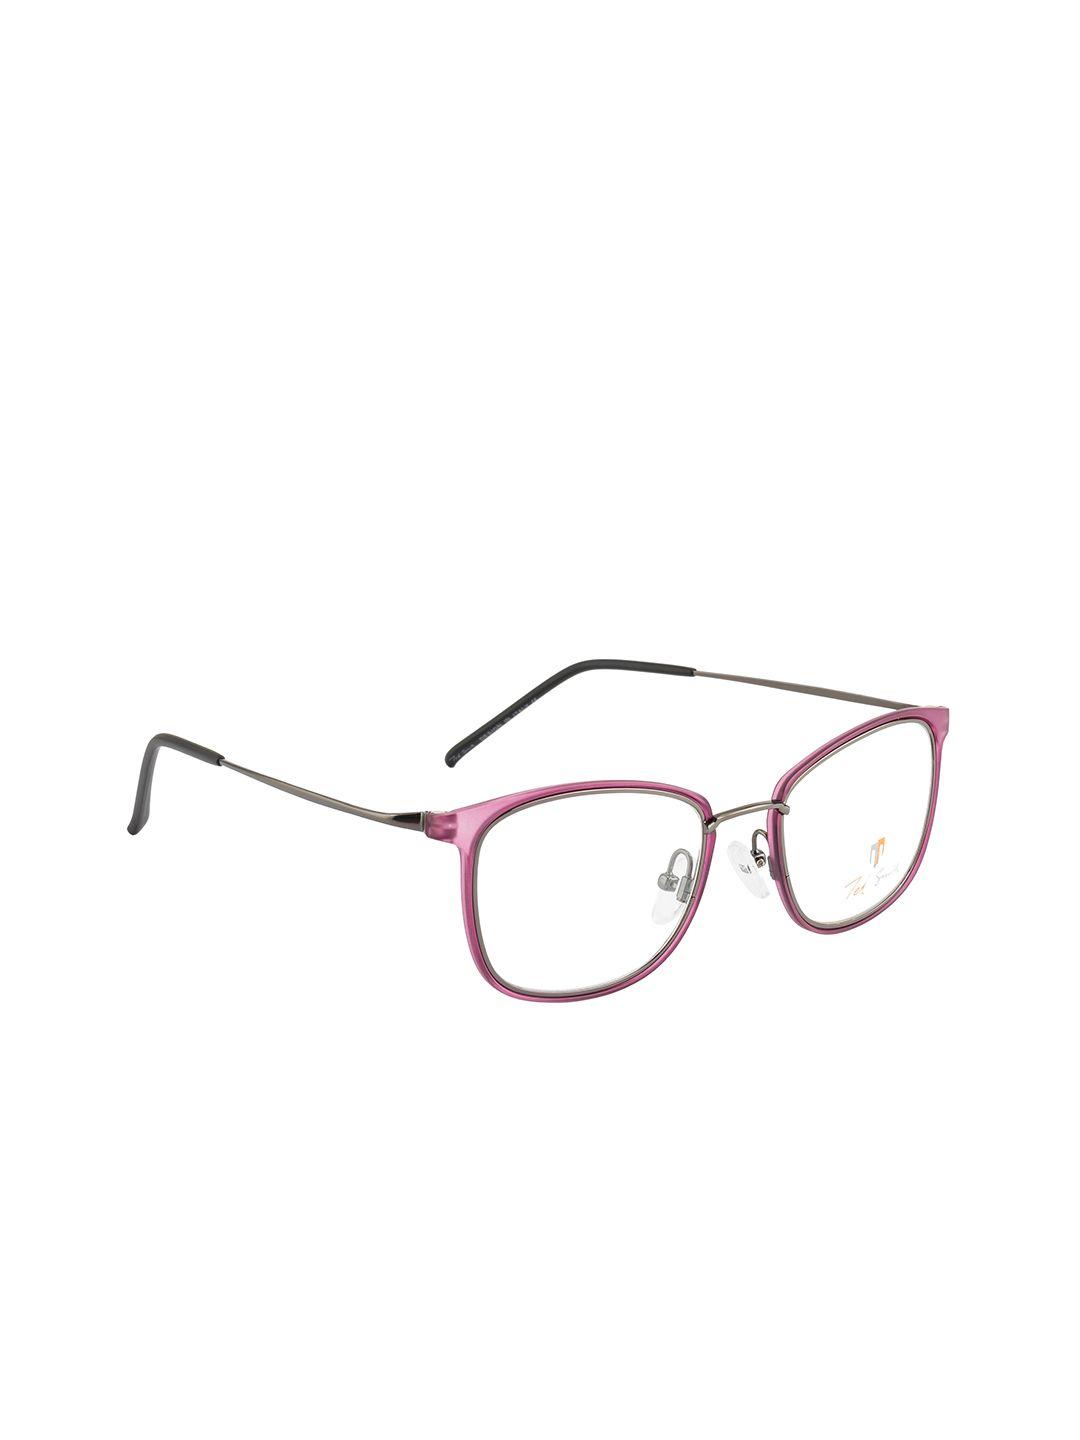 ted smith unisex purple solid square frames eyeglasses